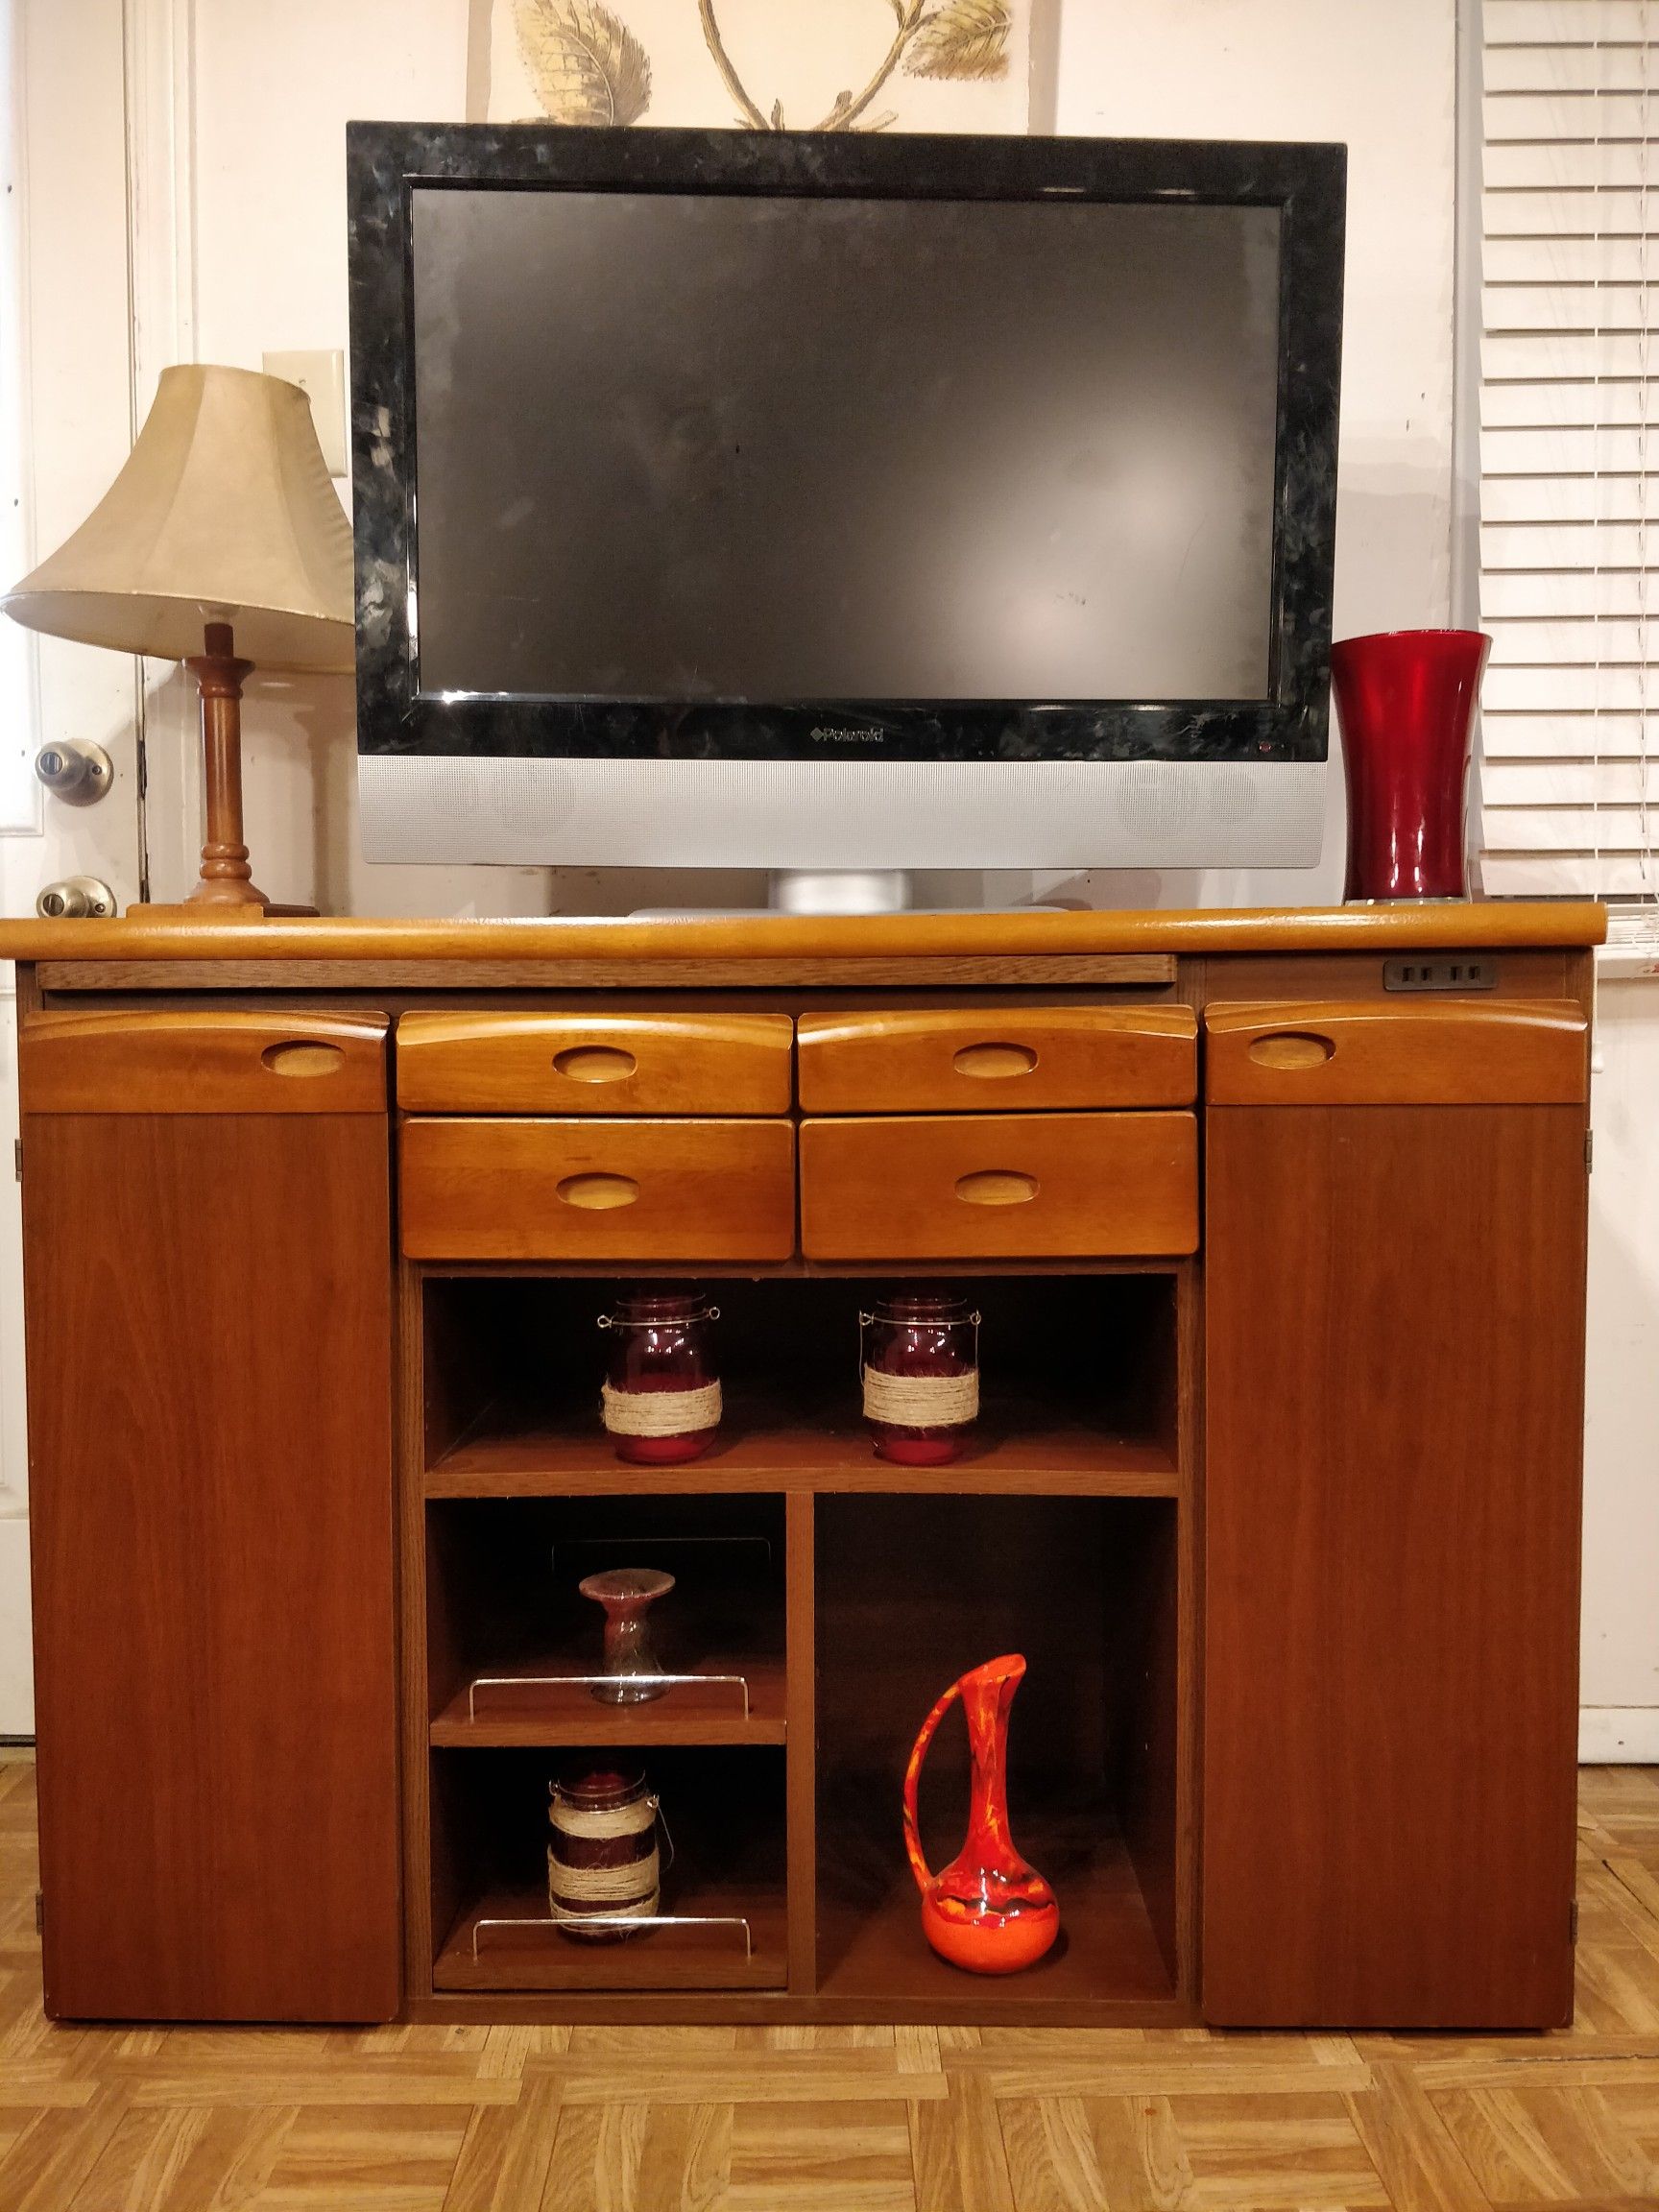 Nice cabinet/TV stand/buffet with drawers and shelves in good condition. L45.5"*W17.5"*H33"